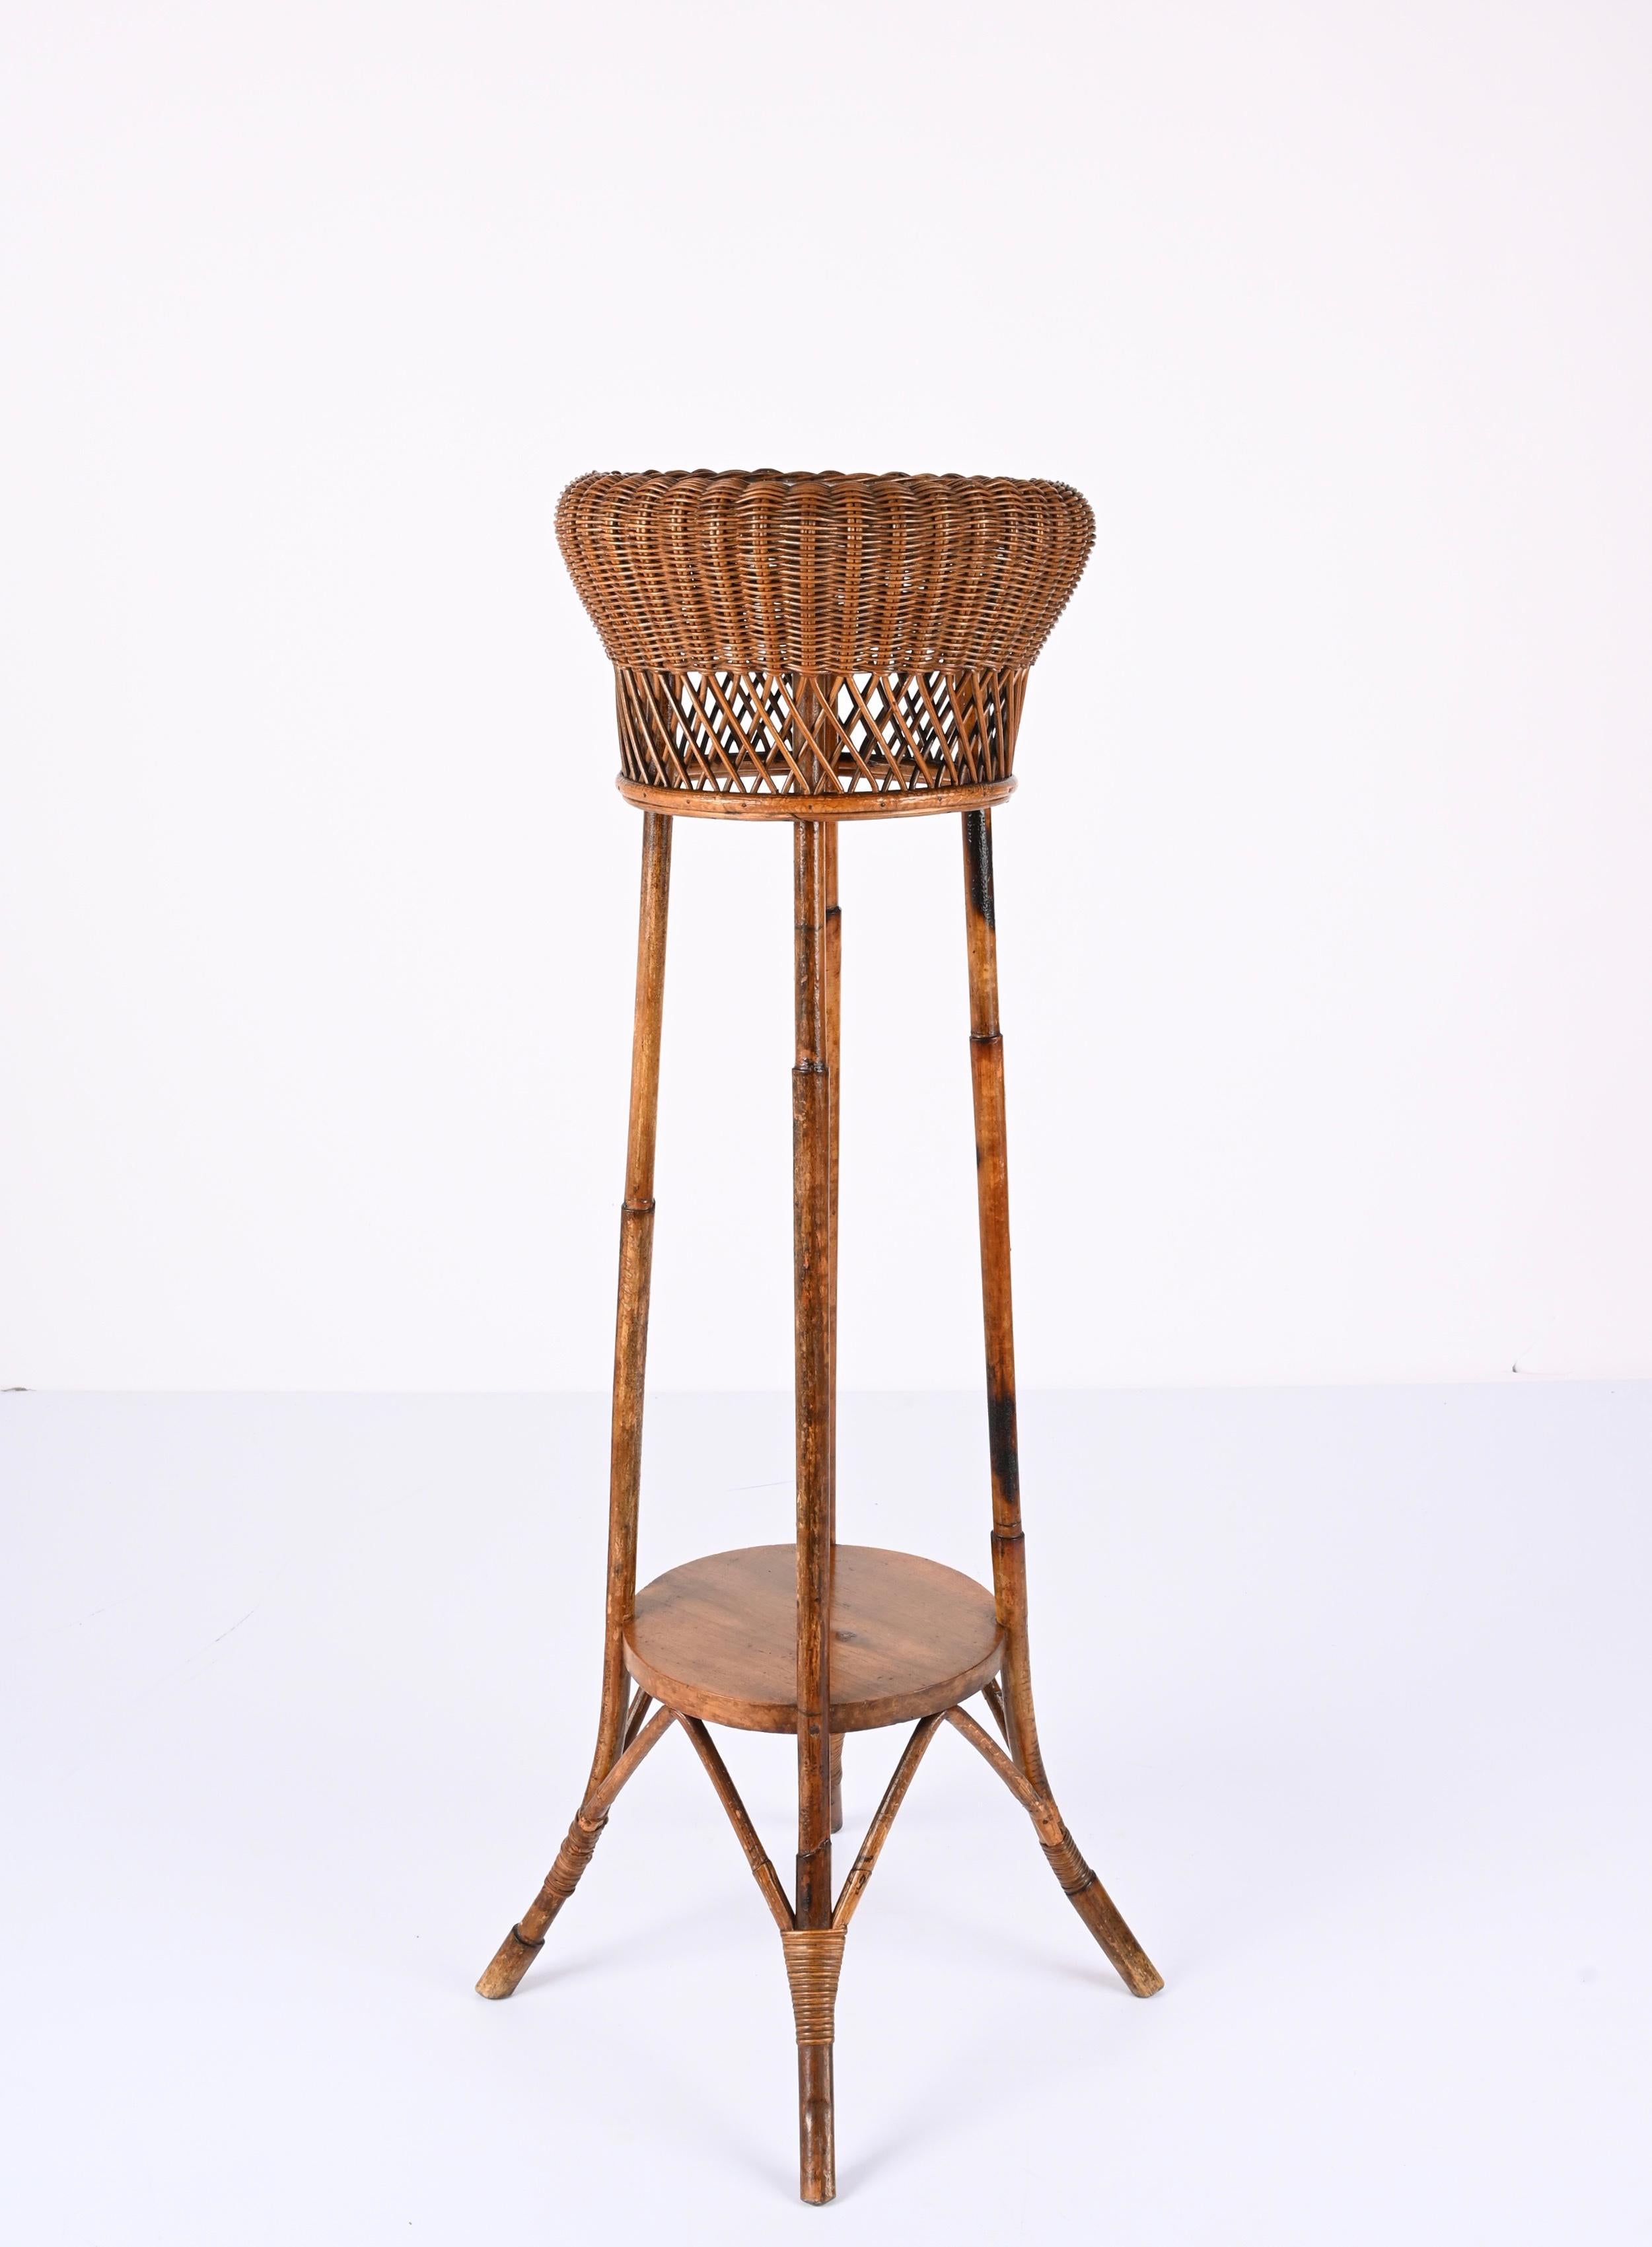 Wood Midcentury Double-Levelled Circular Rattan and Bamboo Italian Pedestal, 1950s For Sale